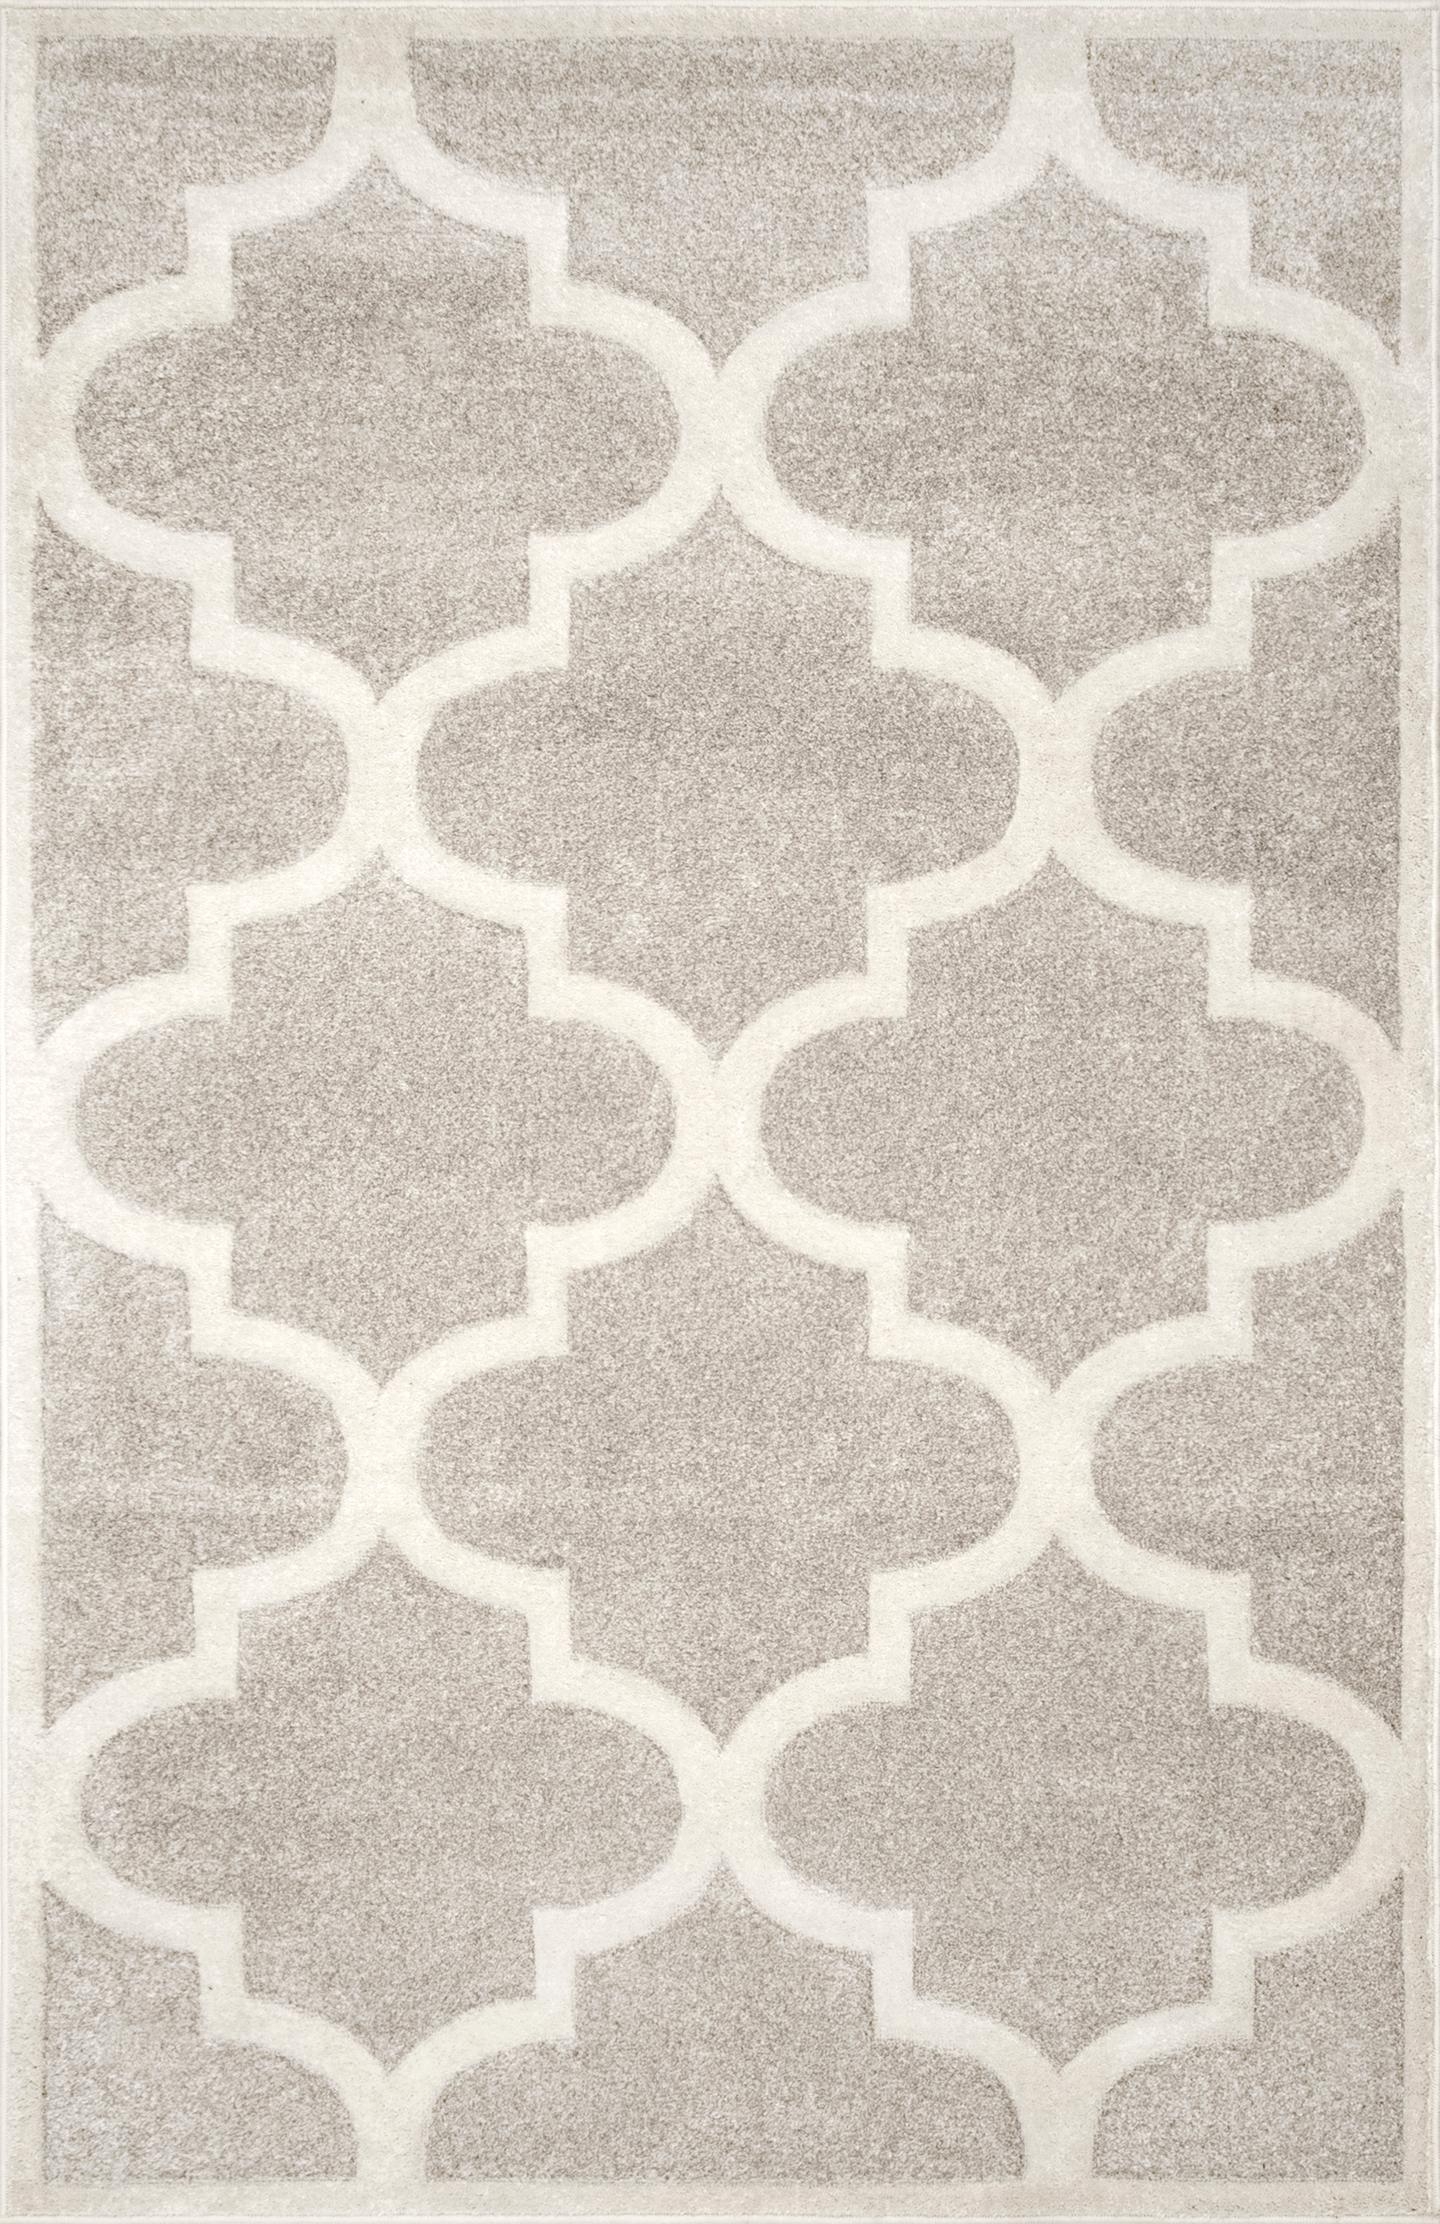  Hand Tufted Fez Area Rug - Image 1